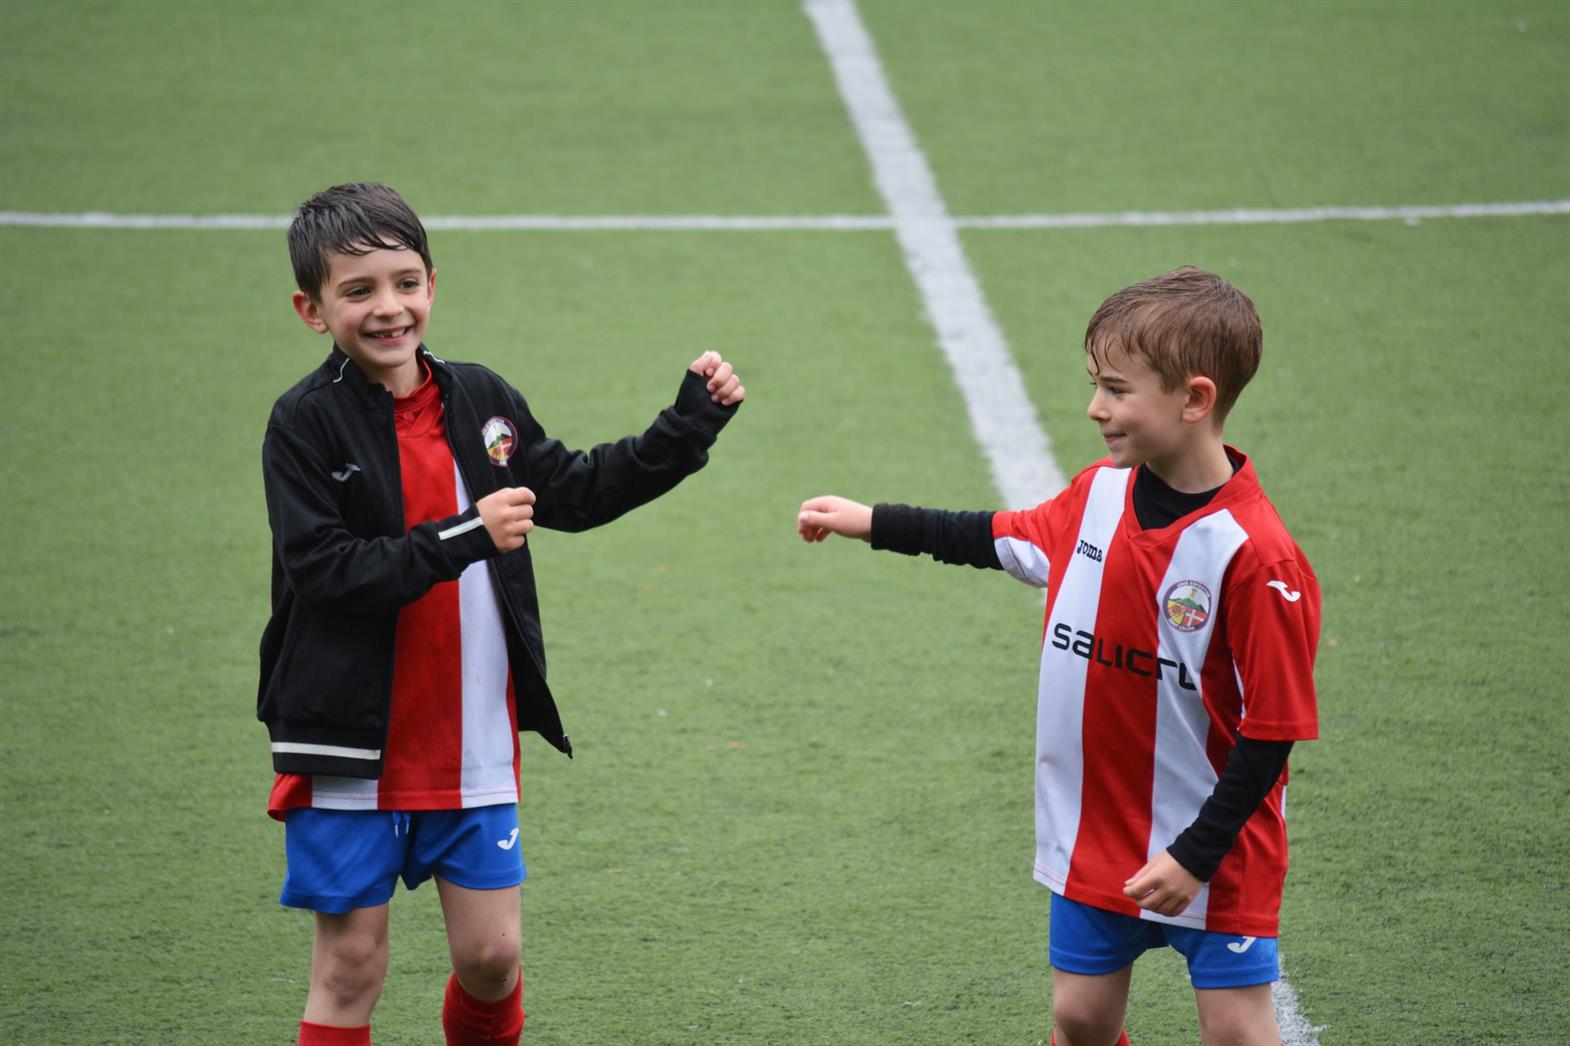 Two boys on a soccer field in socer uniforms smiling and laughing